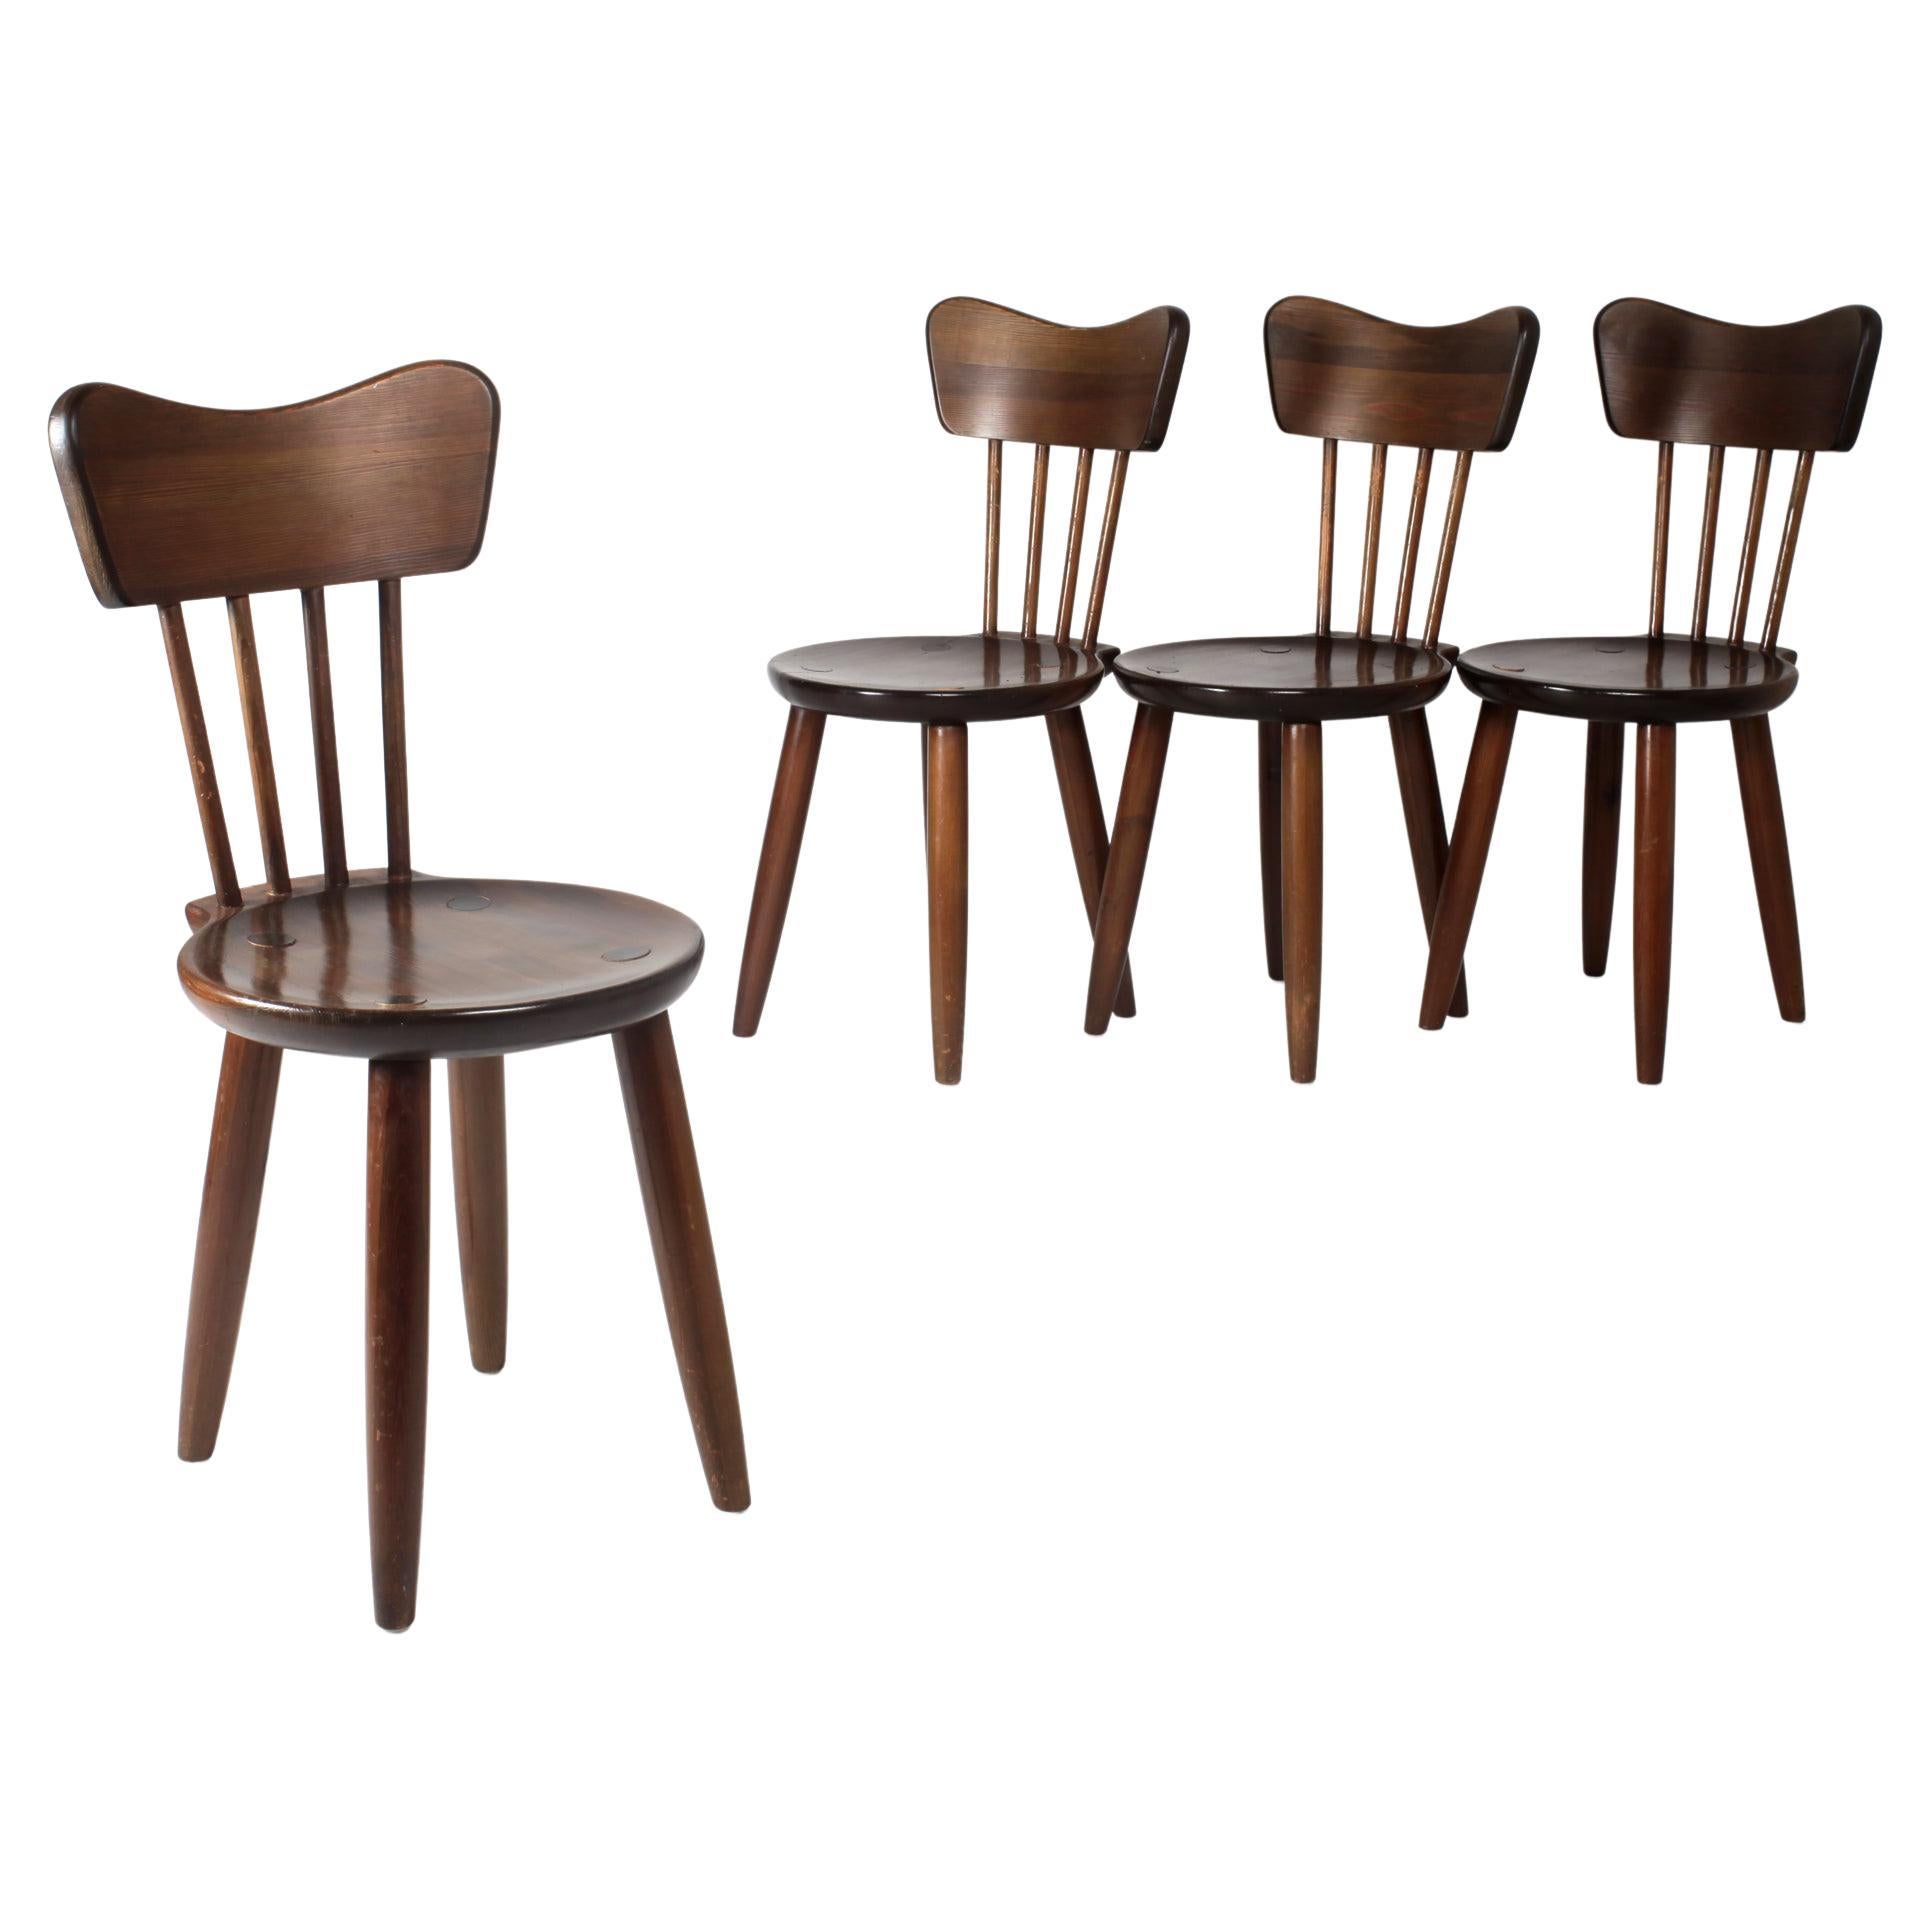 Swedish Chairs in Solid Pine Wood 1930 by Torsten Claeson